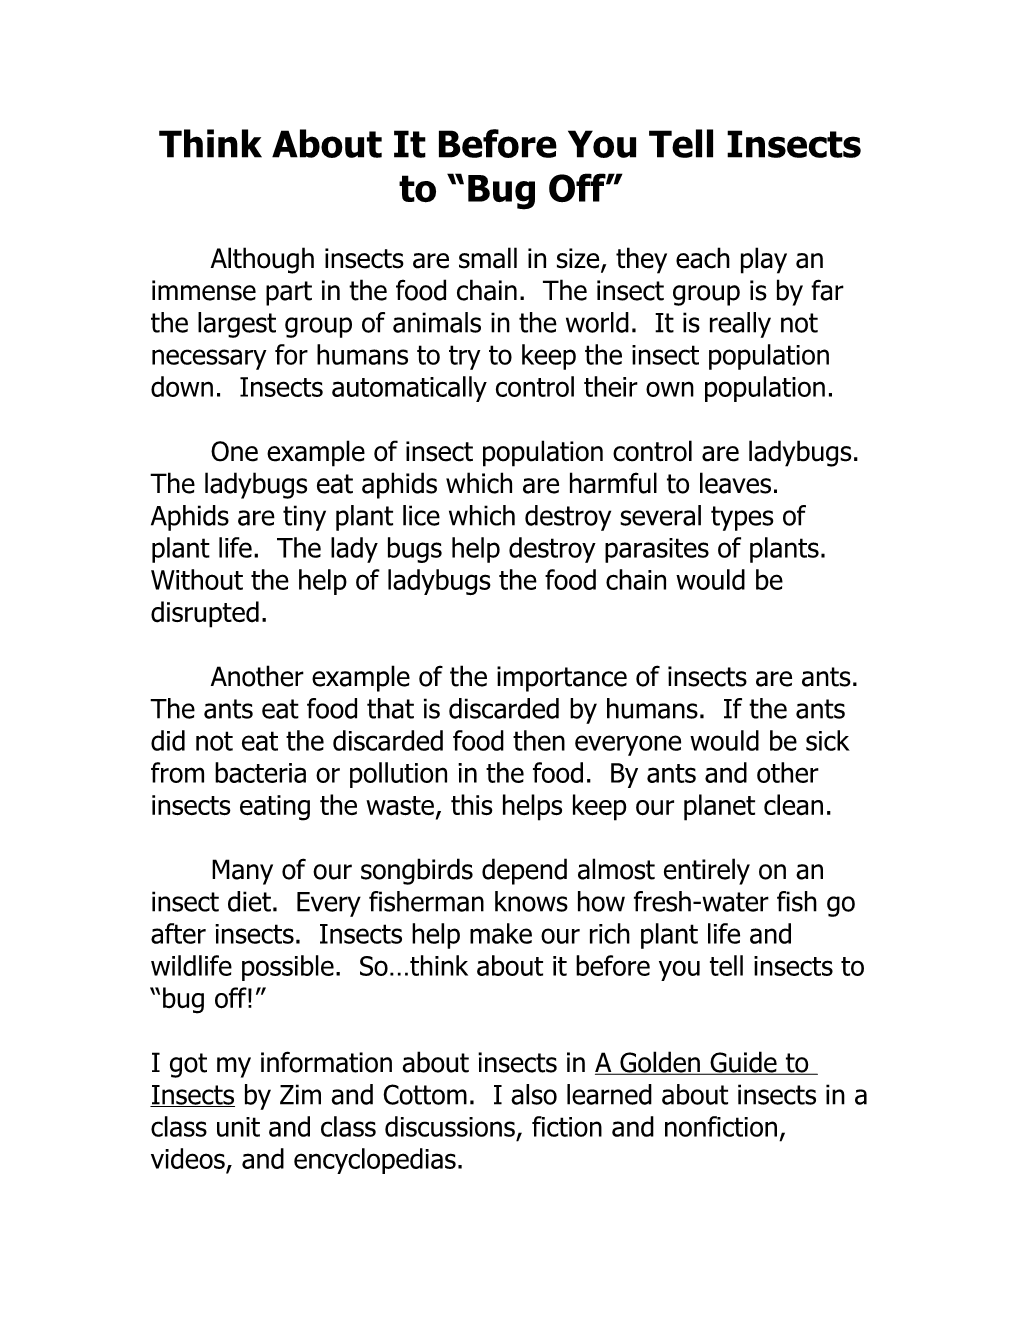 Think About It Before You Tell Insects to Bug Off